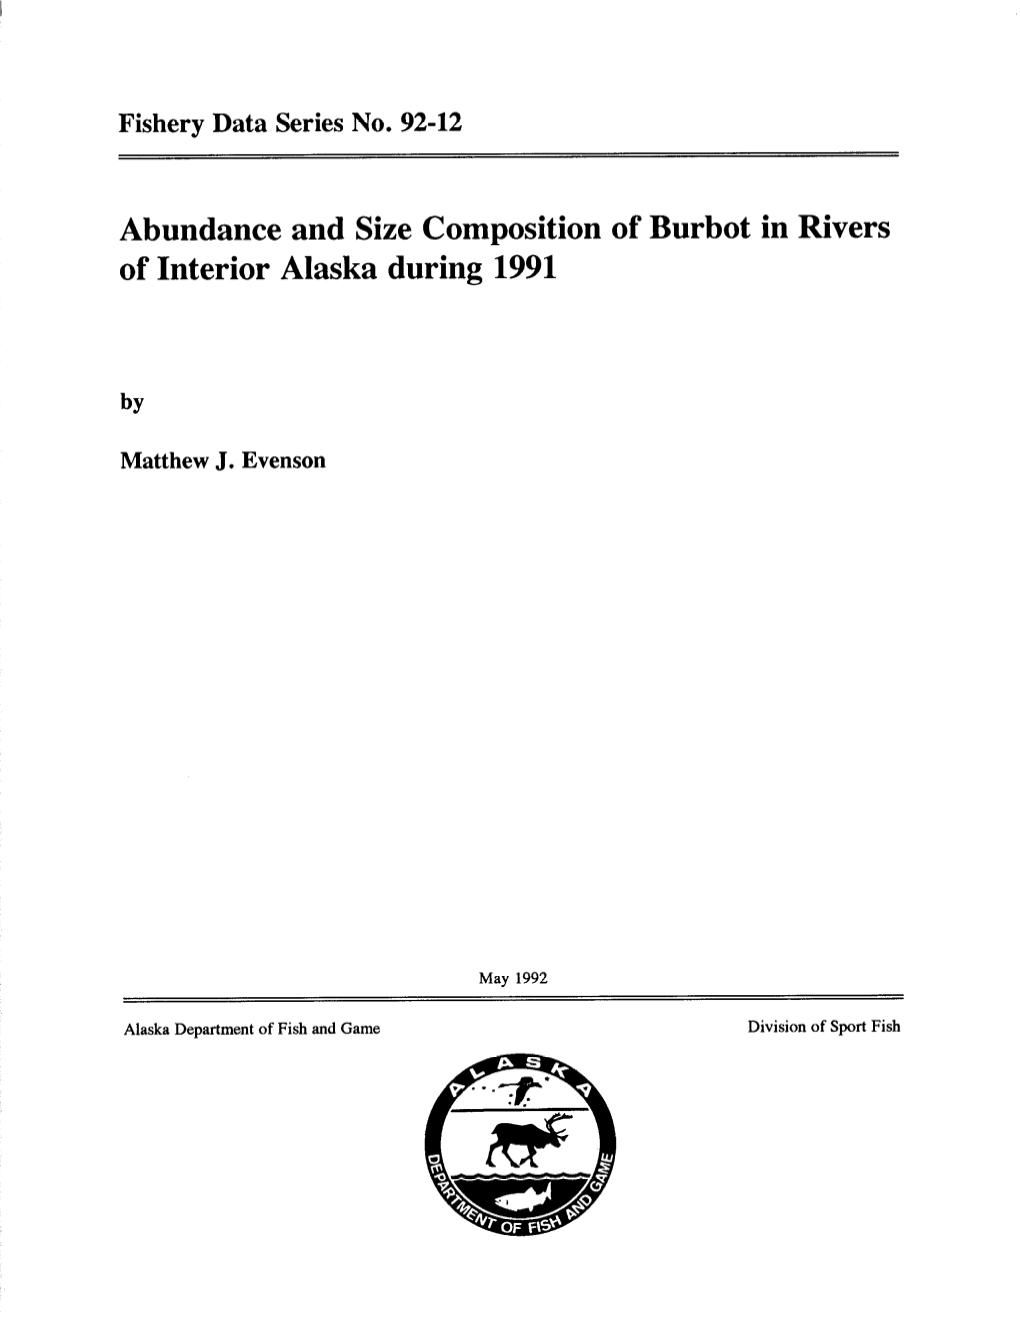 Abundance and Size Composition of Burbot in Rivers of Interior Alaska During 1991